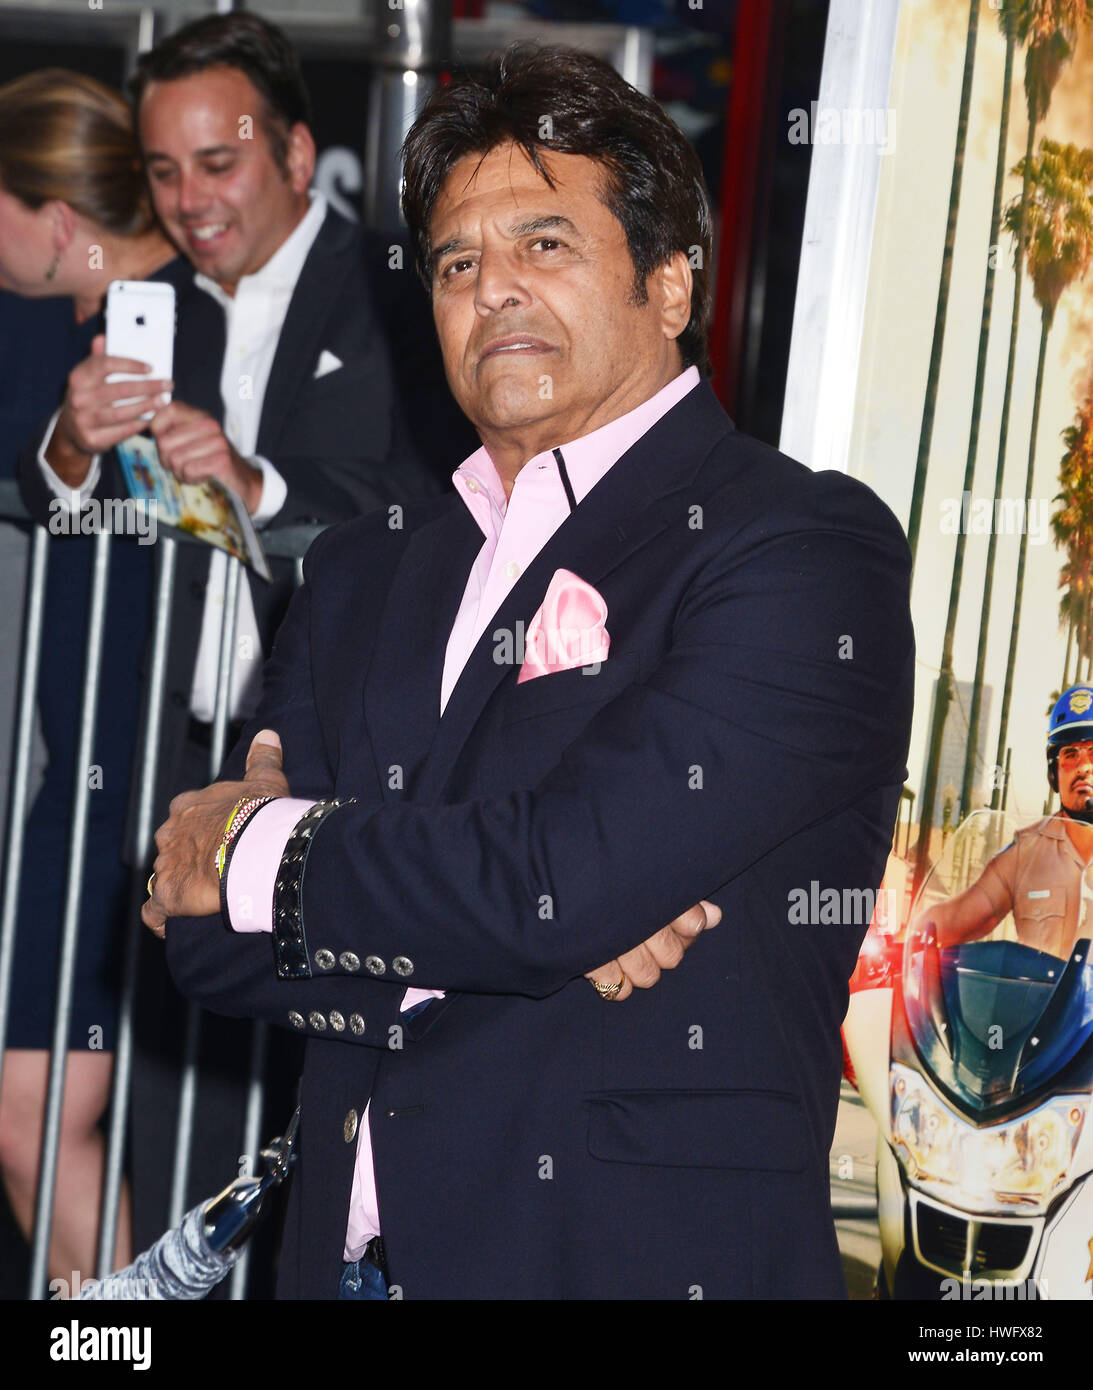 Los Angeles, USA. 20th Mar, 2017. Erik Estrada 064 arriving at the CHIPS Premiere at the TCL Chinese Theatre in Los Angeles. March 20, 2017. Credit: Tsuni/USA/Alamy Live News Stock Photo